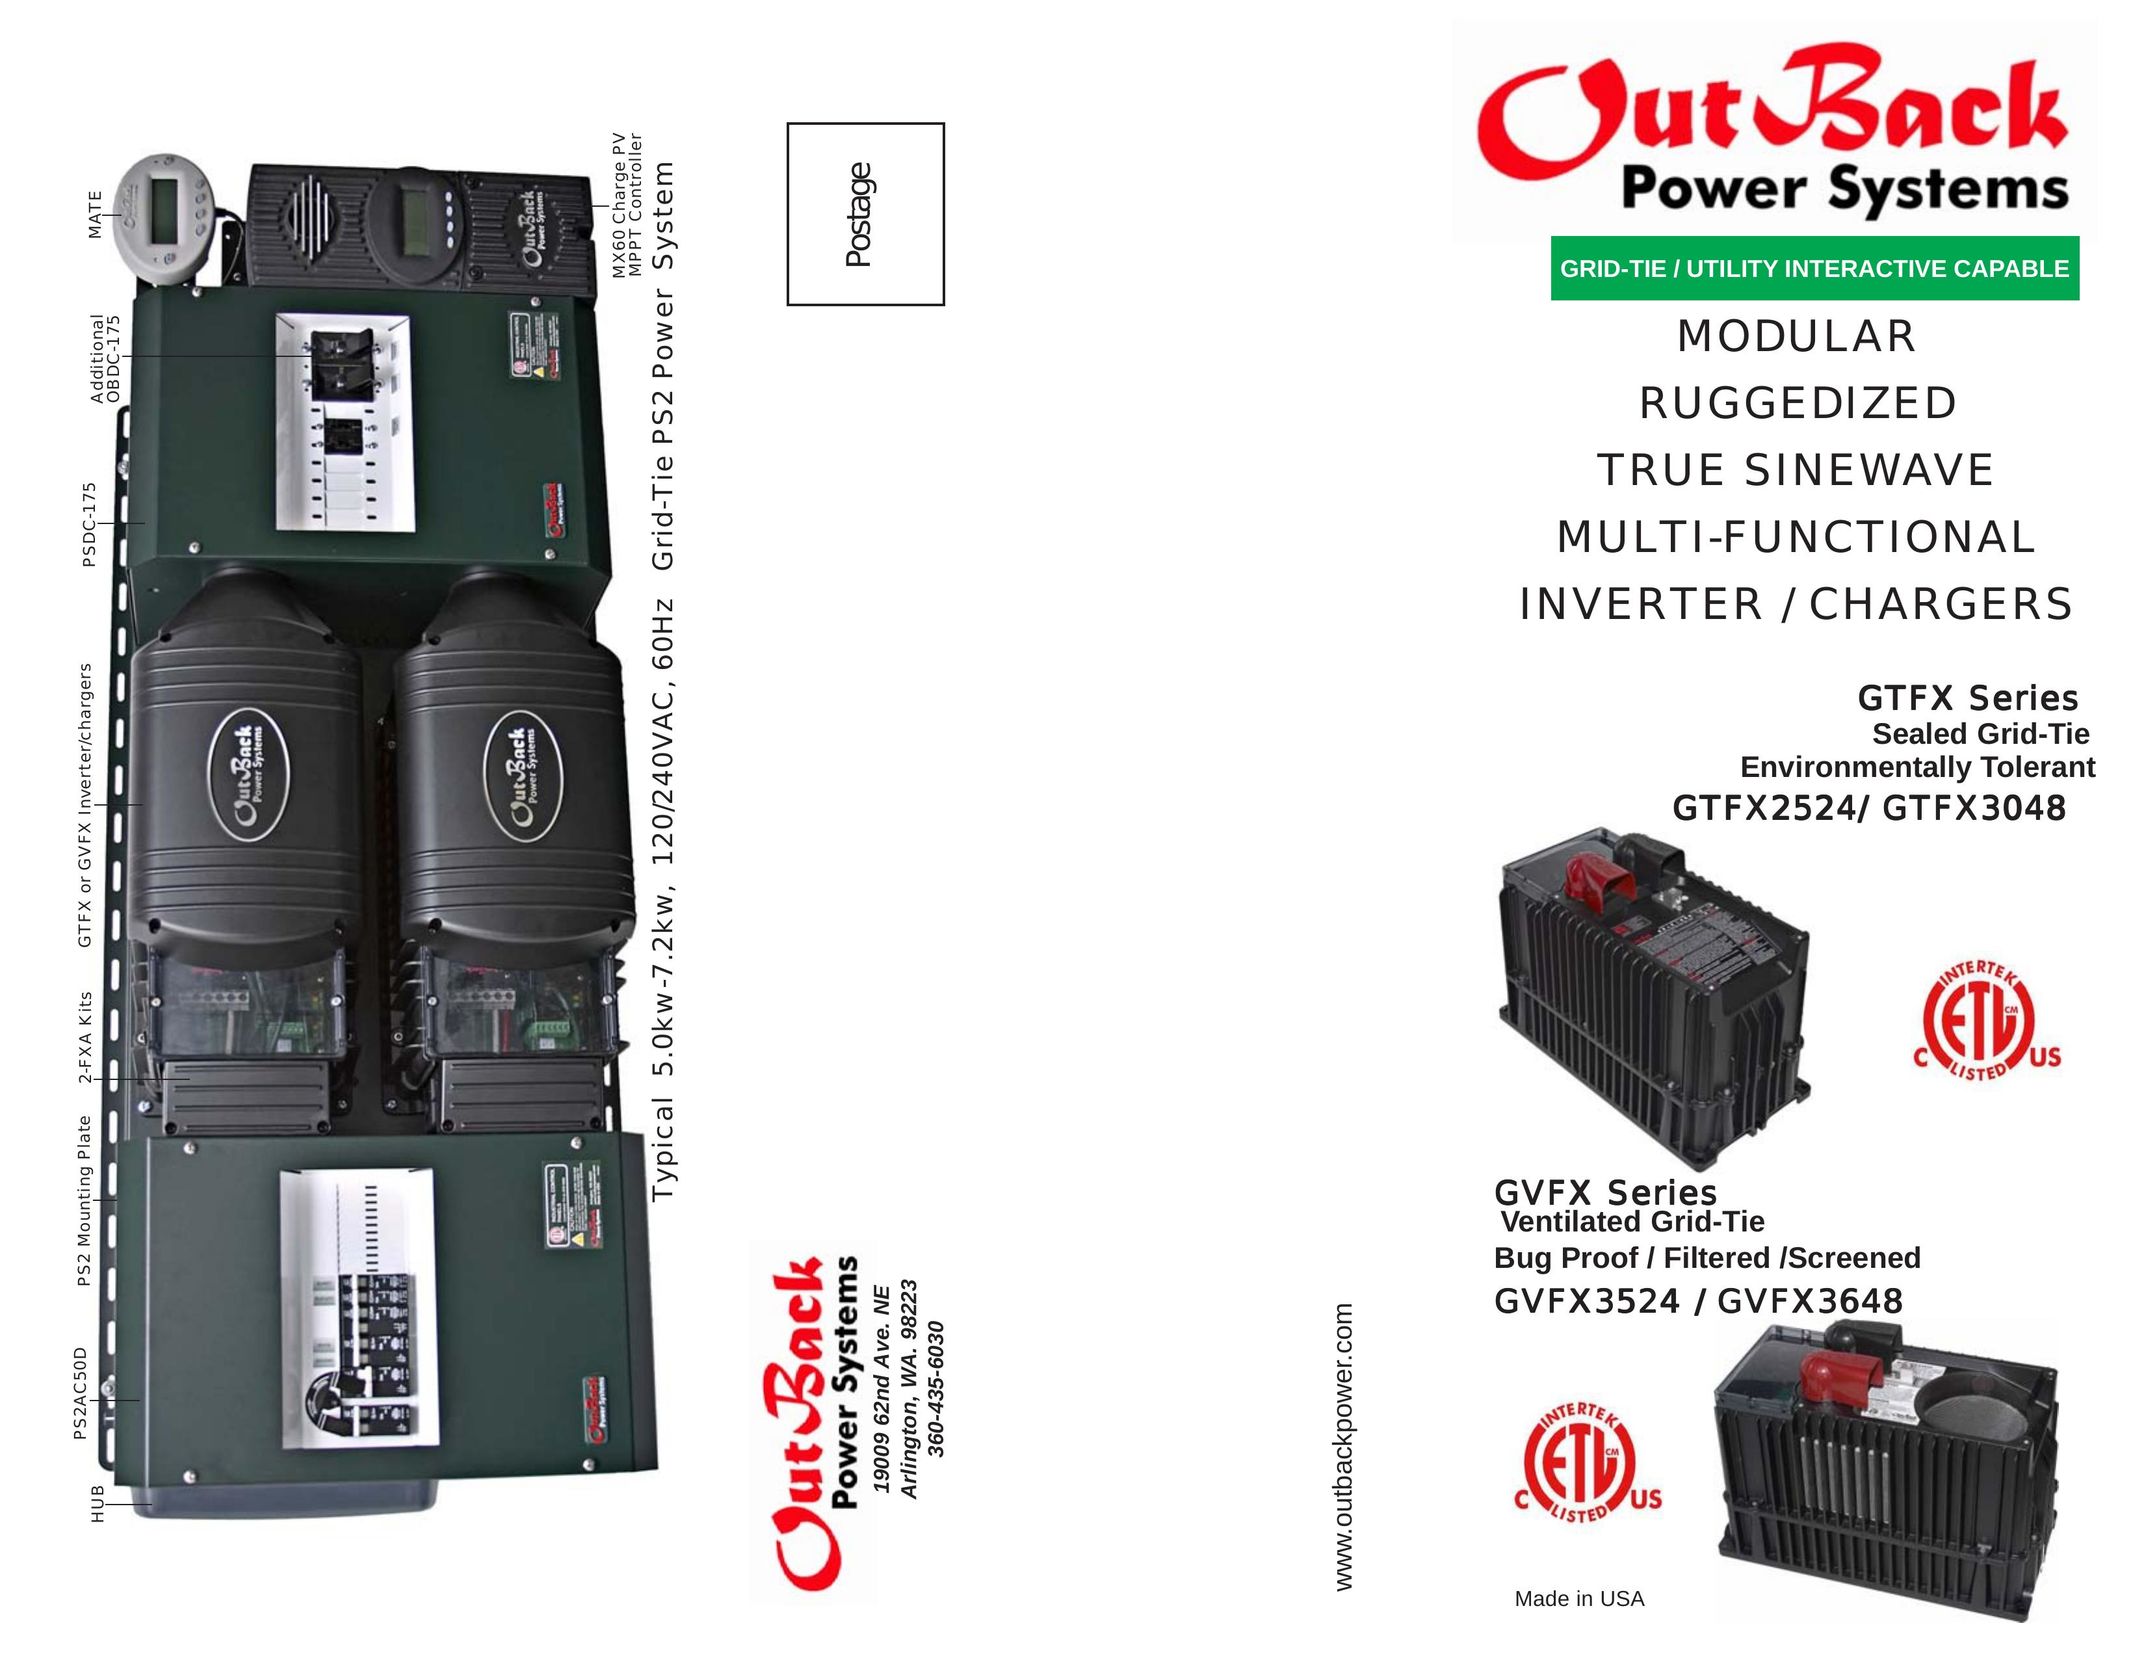 Outback Power Systems GTFX3048 Battery Charger User Manual